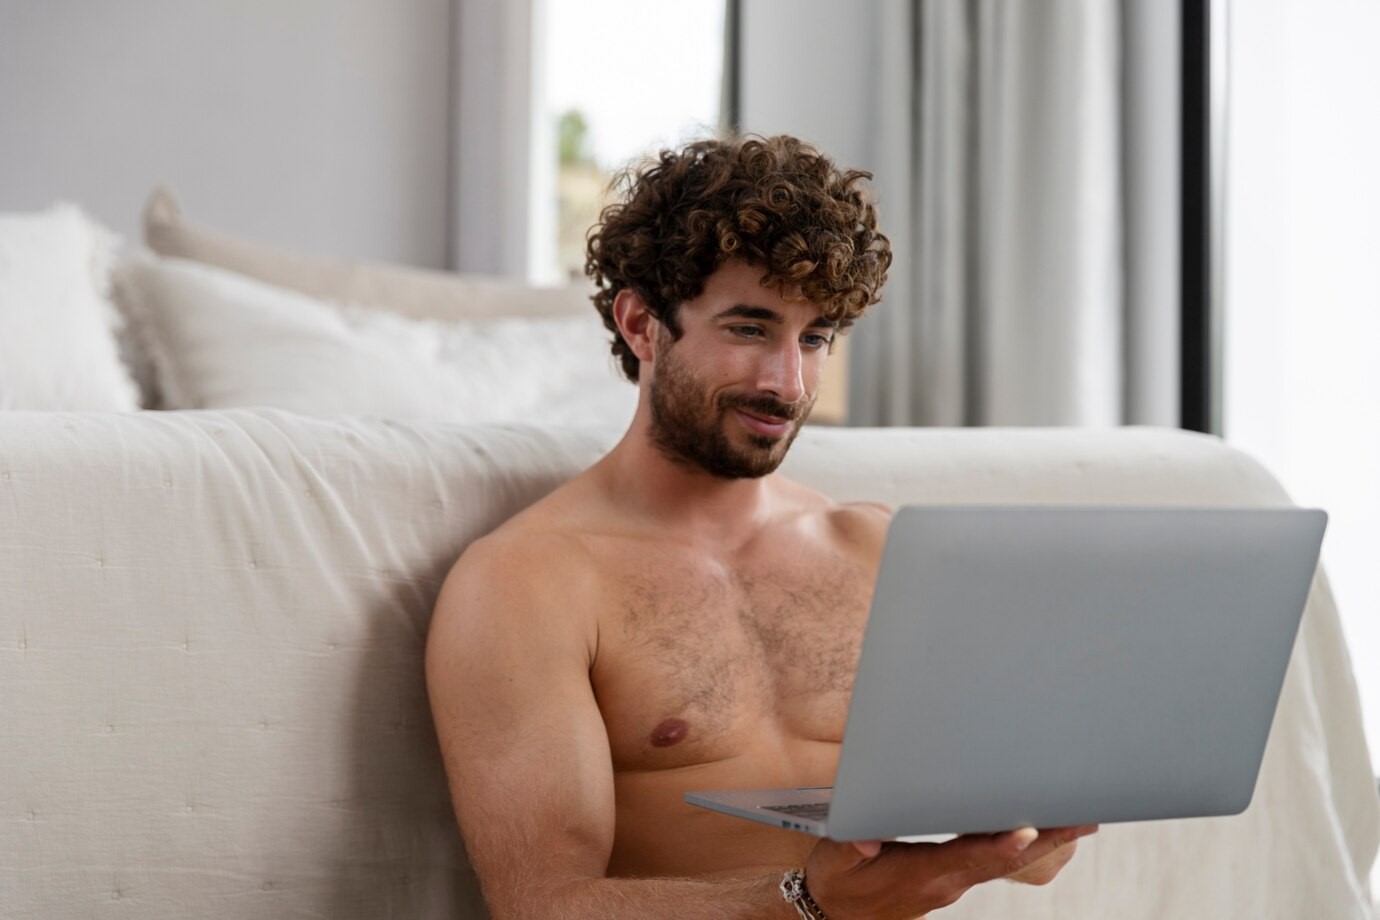 Free video chat with gays: what to expect?